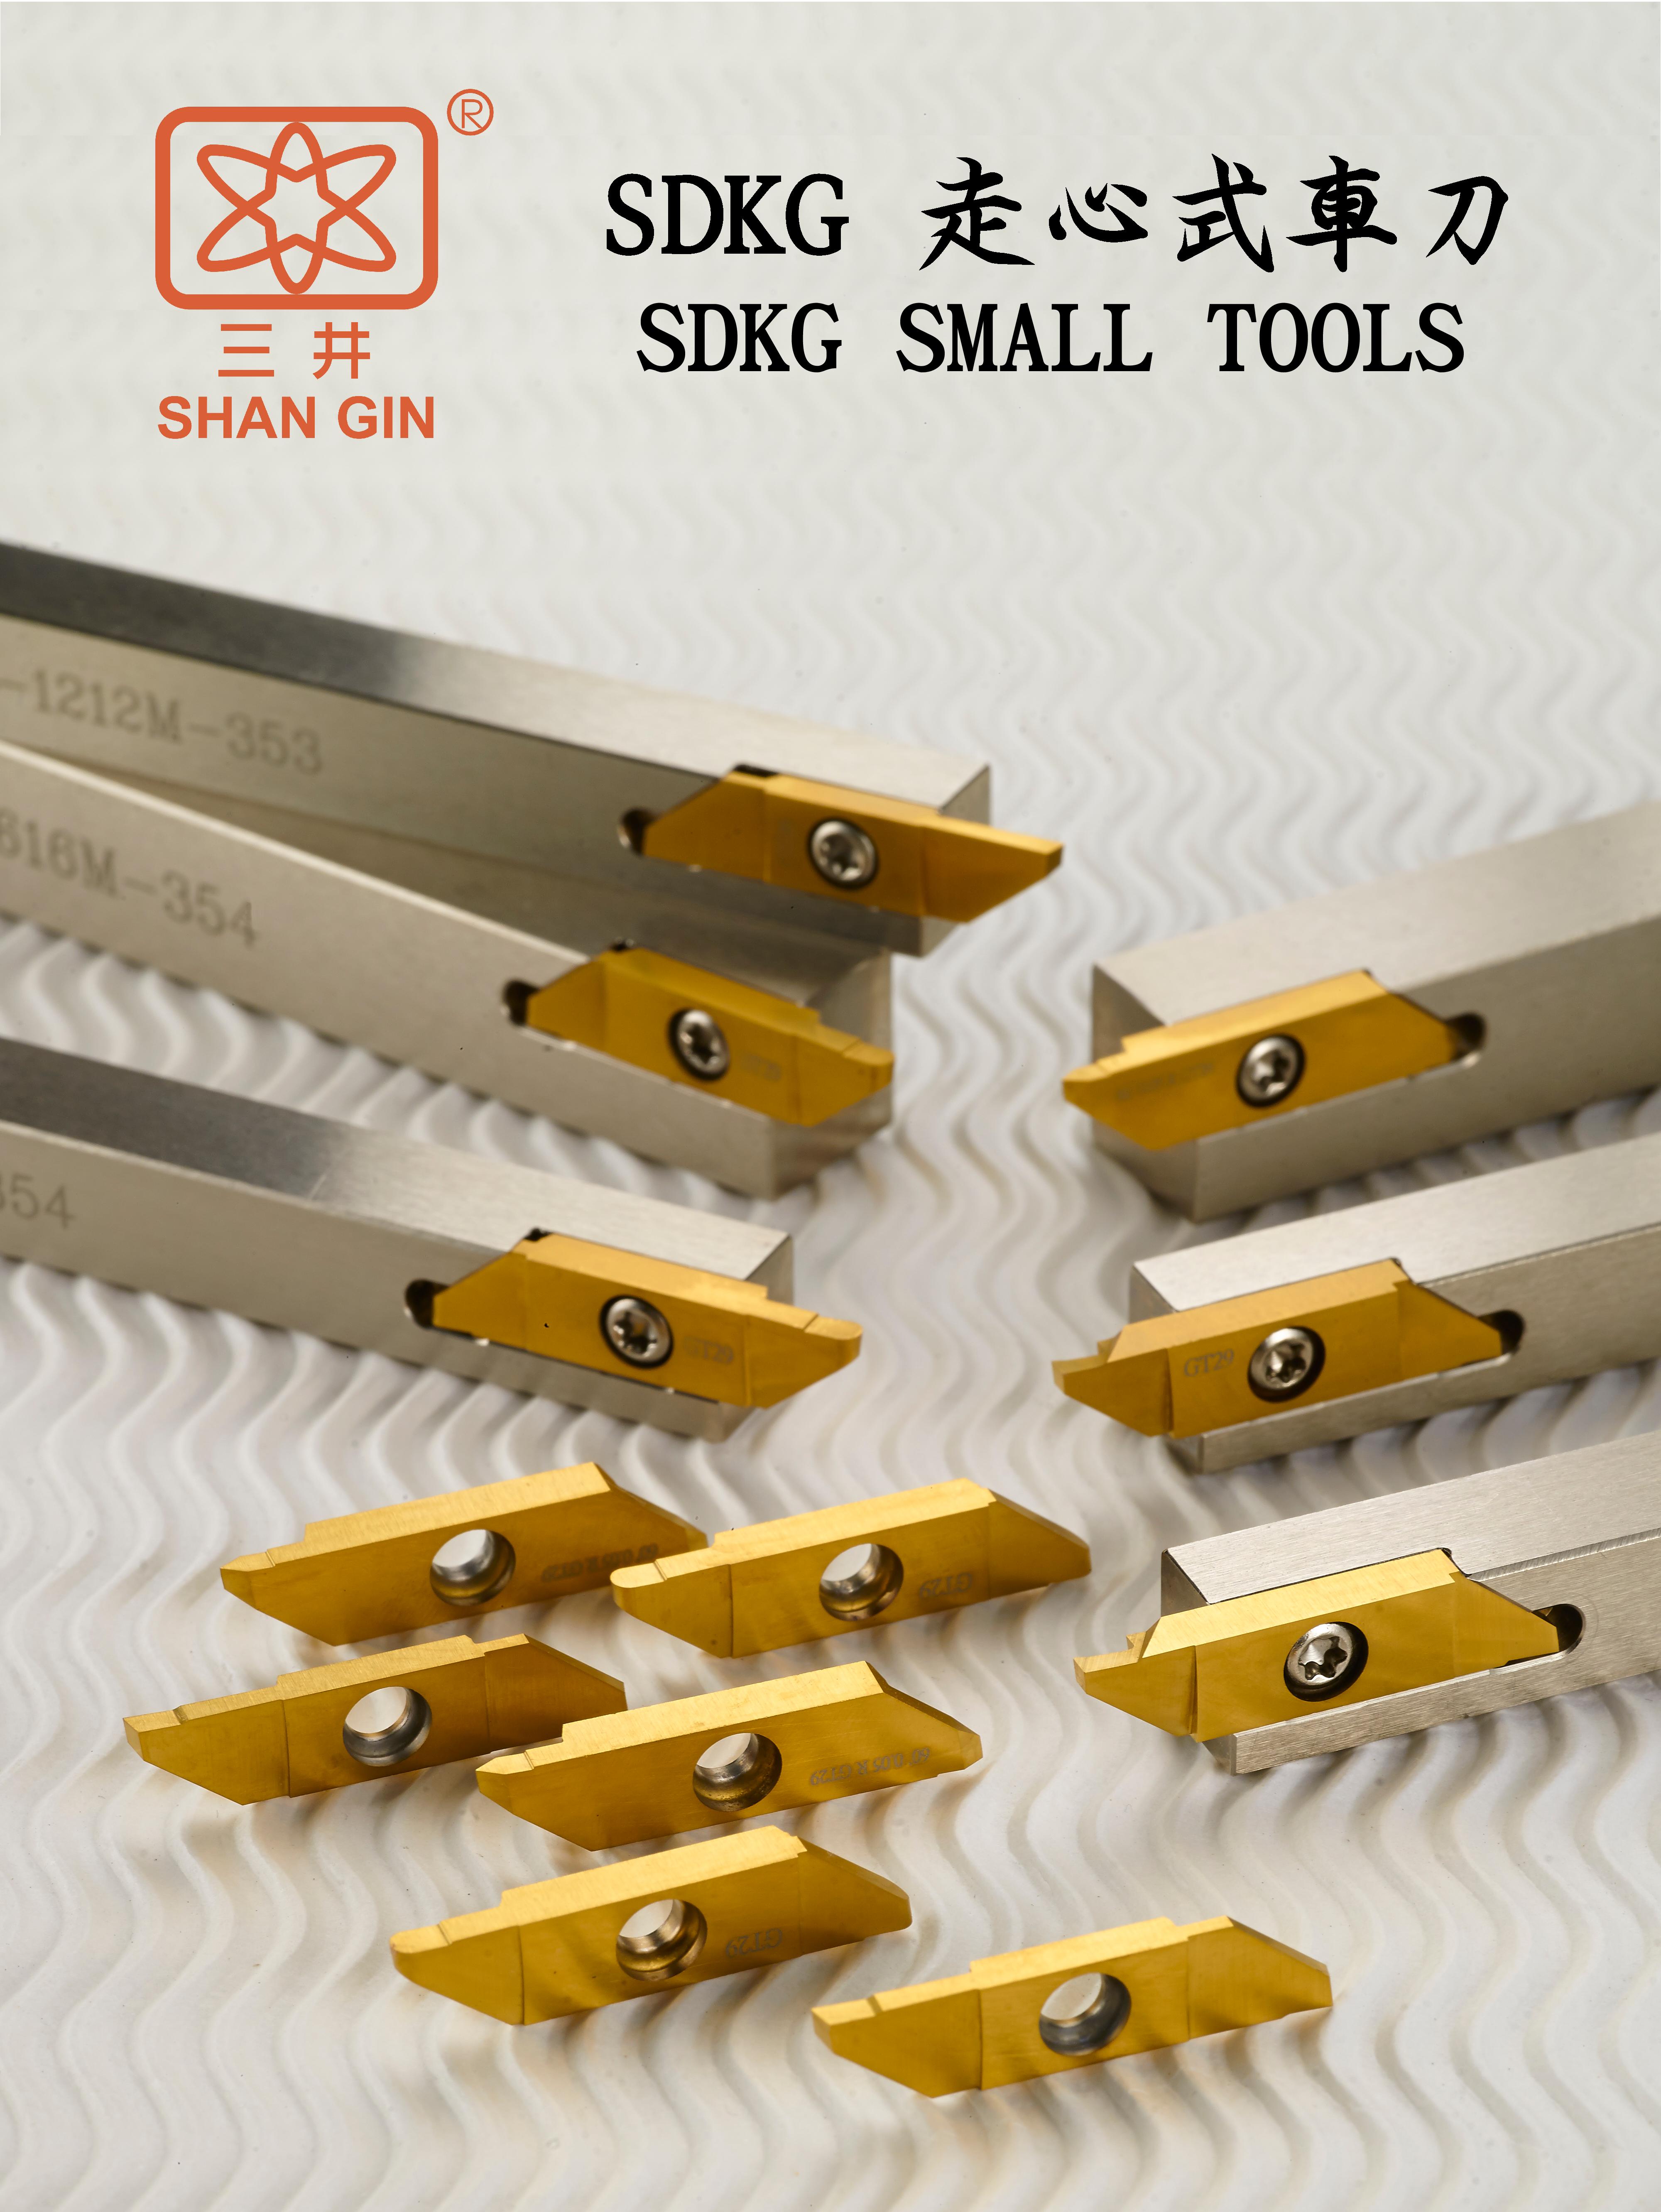 Products|SDKG SMALL TOOLS